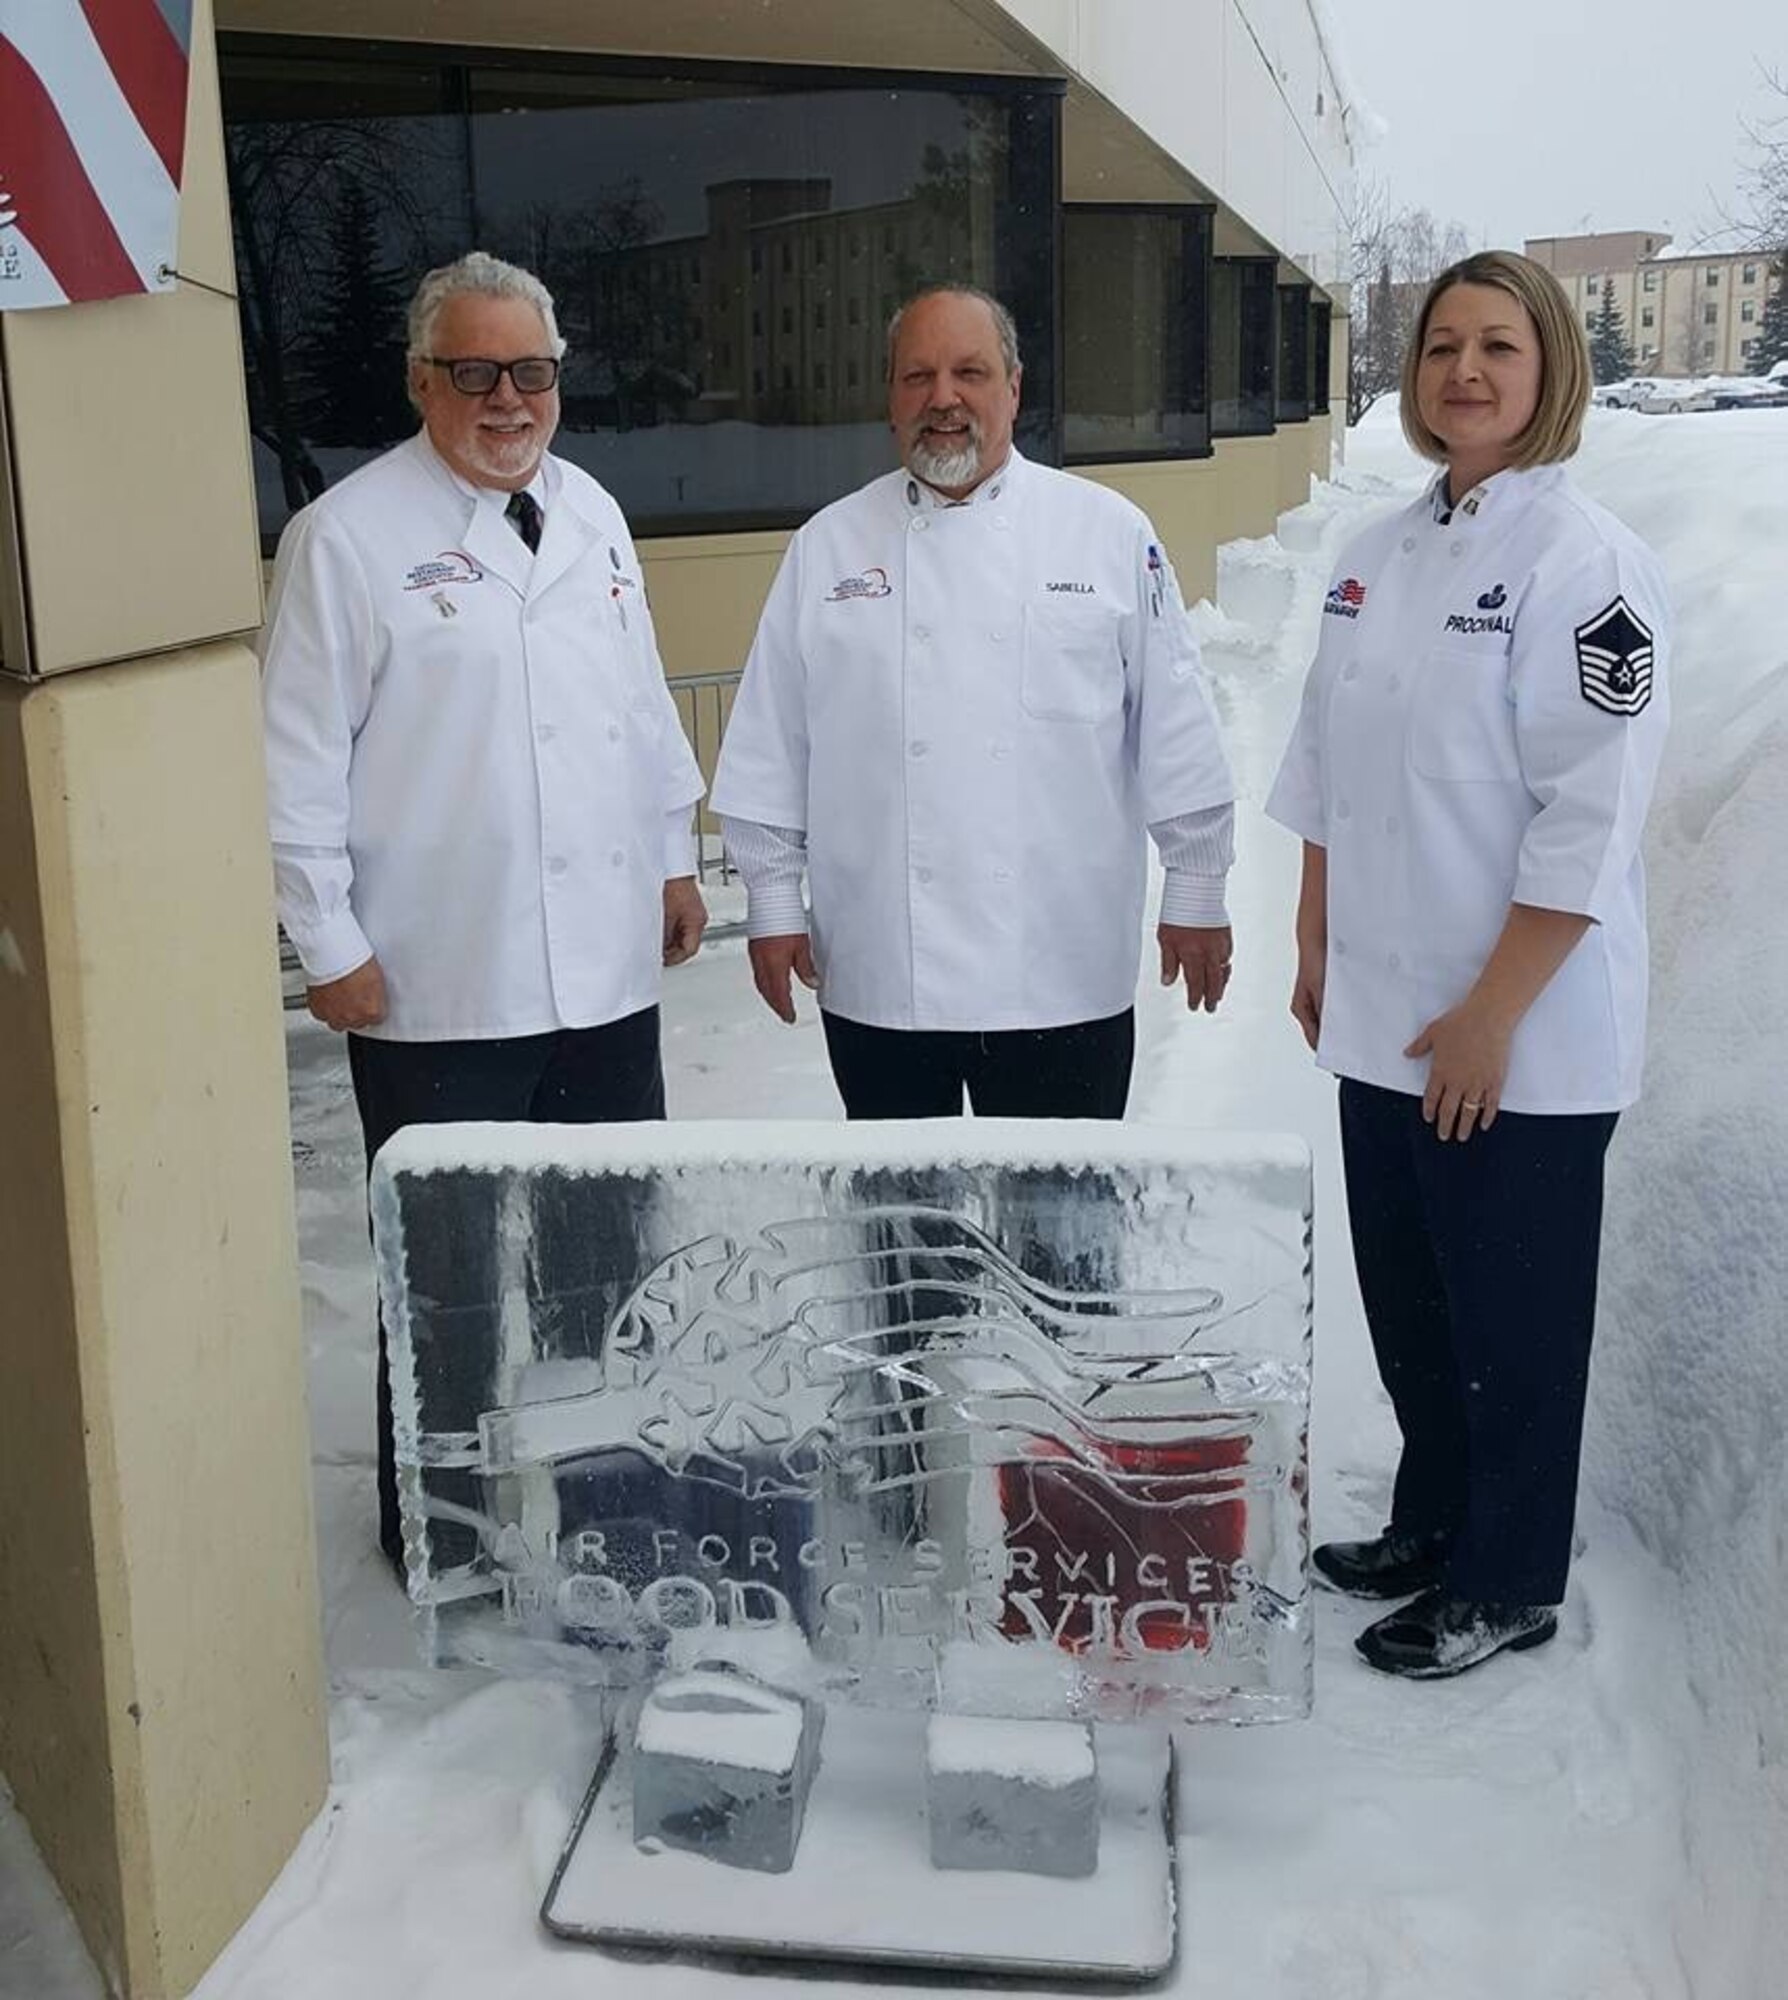 U.S. Air Force Master Sgt. Amanda Procknal leads fellow Hennessy Travelers Jim Sellers (left) and Mike Sabella to inspect food service operations at Eielson Air Force Base, Alaska.The food service staff created an ice sculpture to welcome them. (Courtesy photo)